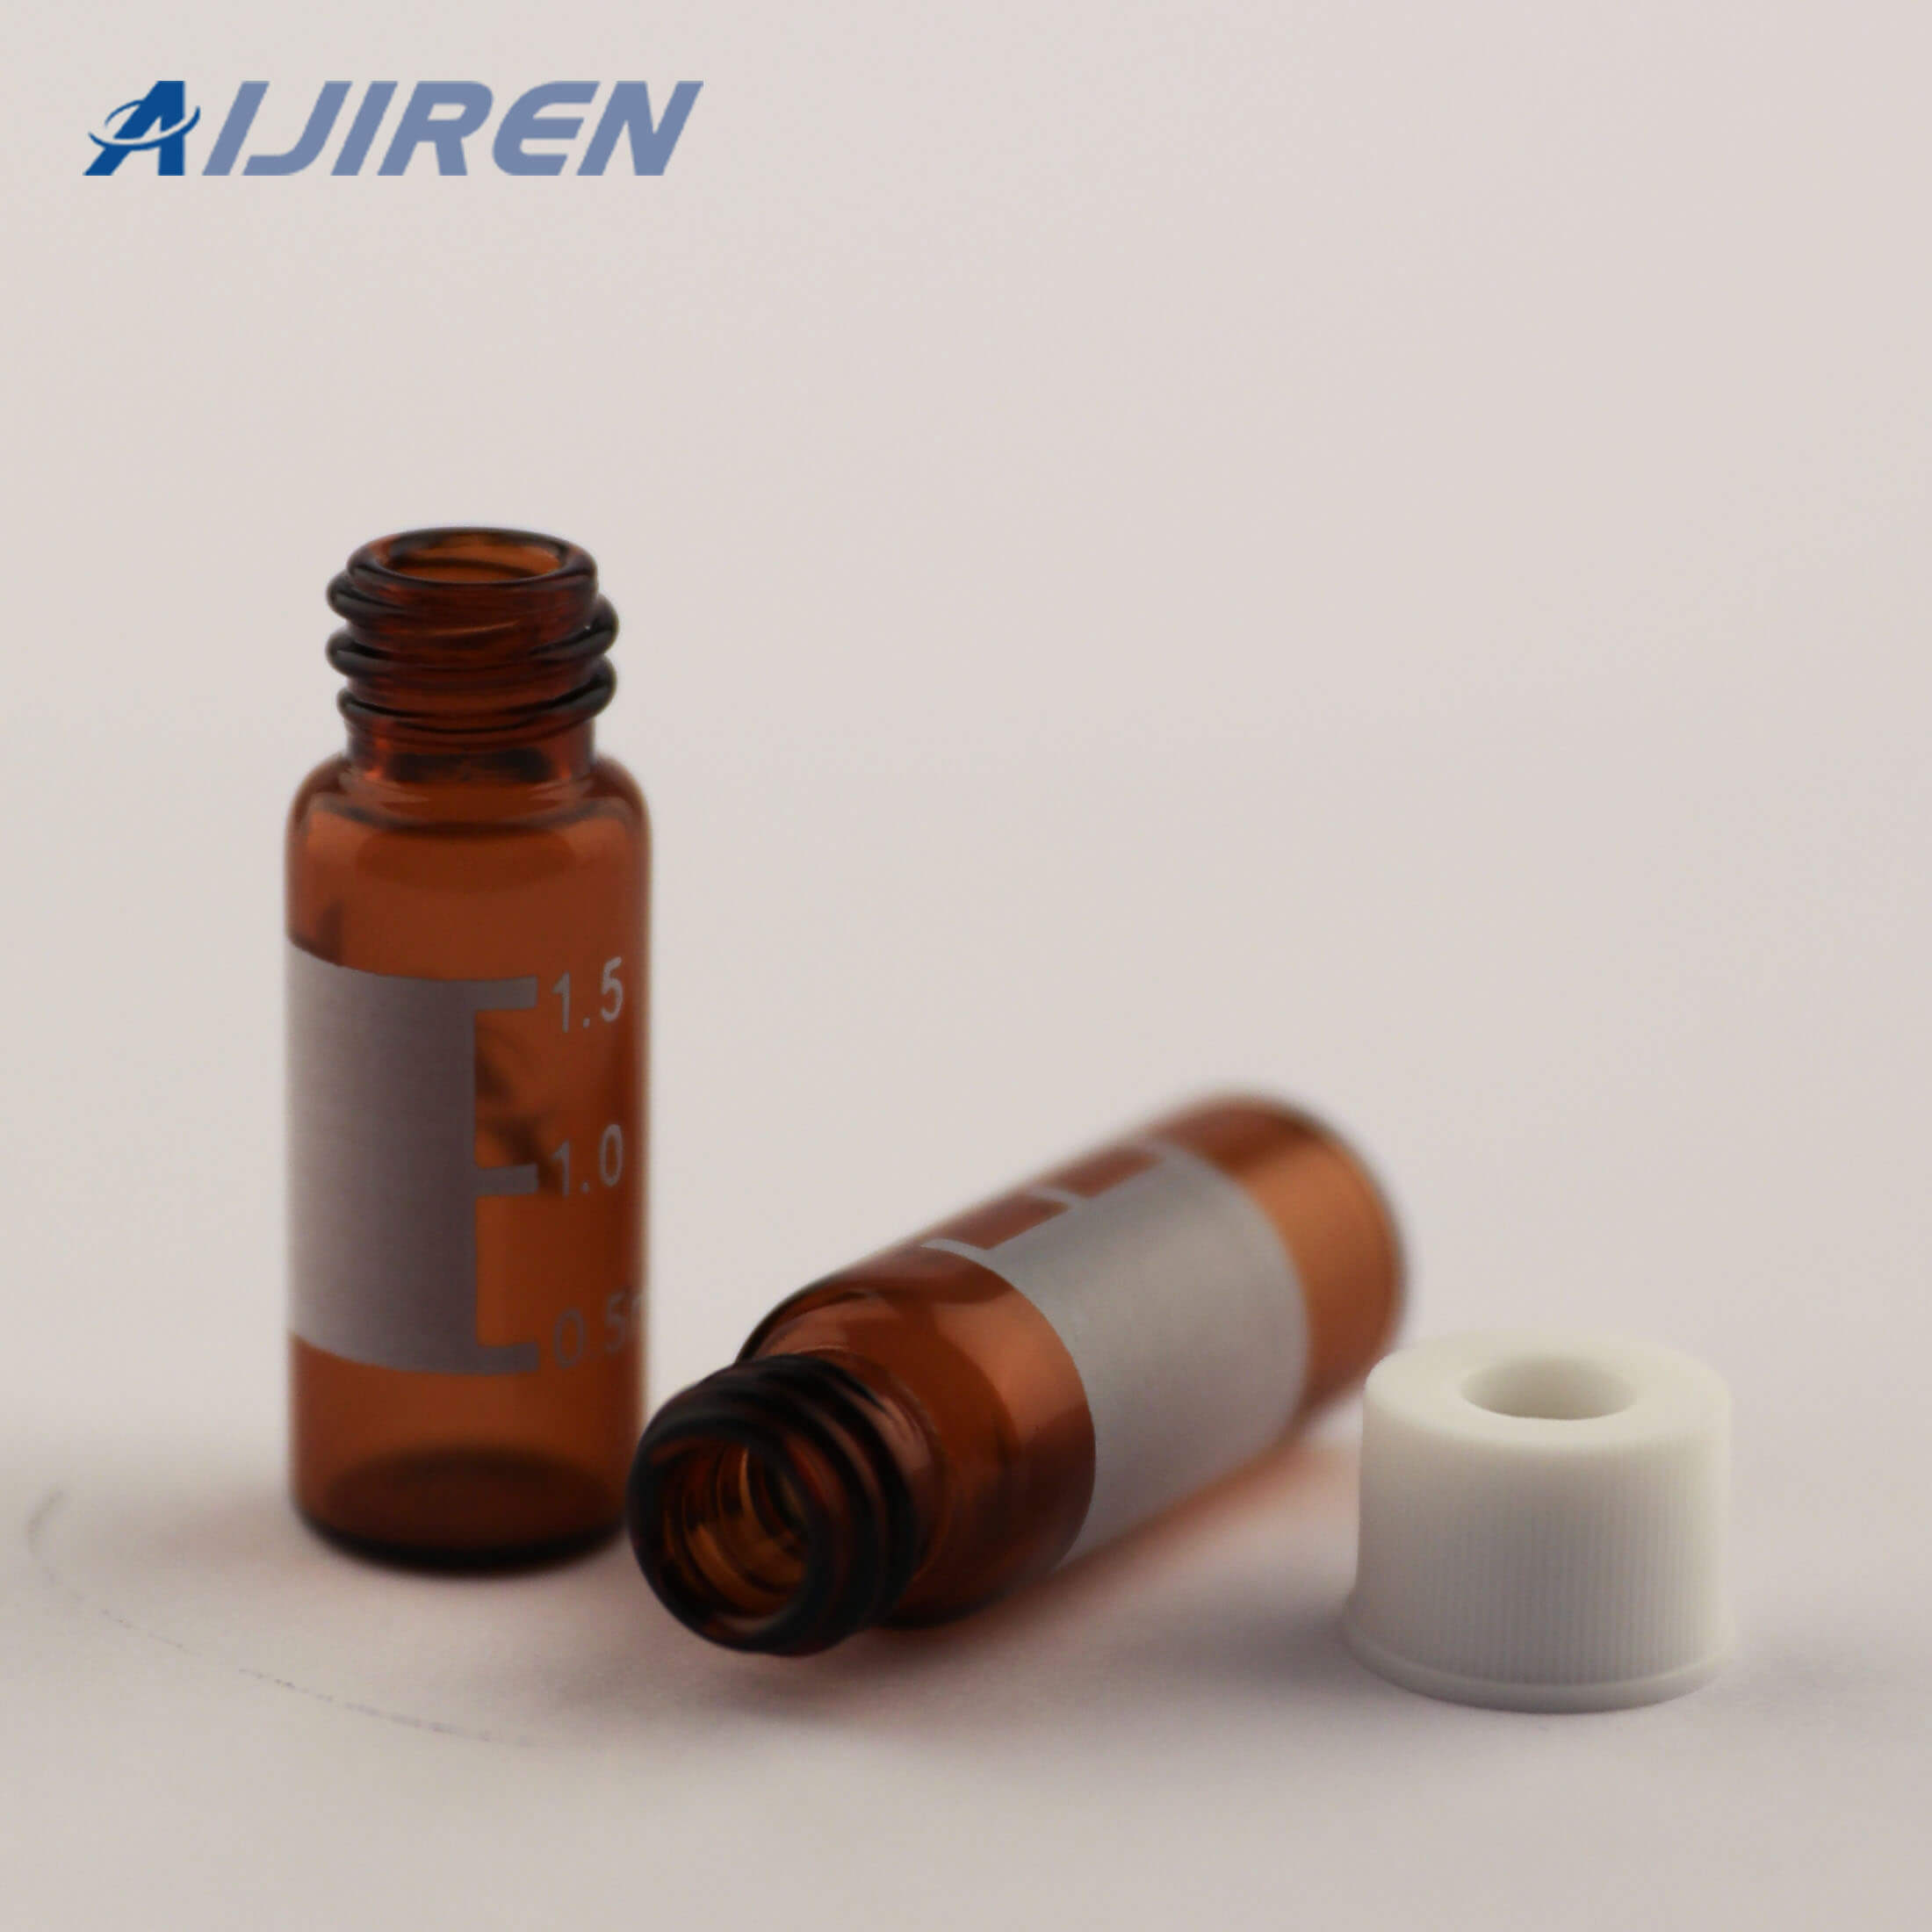 8mm Screw Thread HPLC Glass Vial for THERMO FISHER